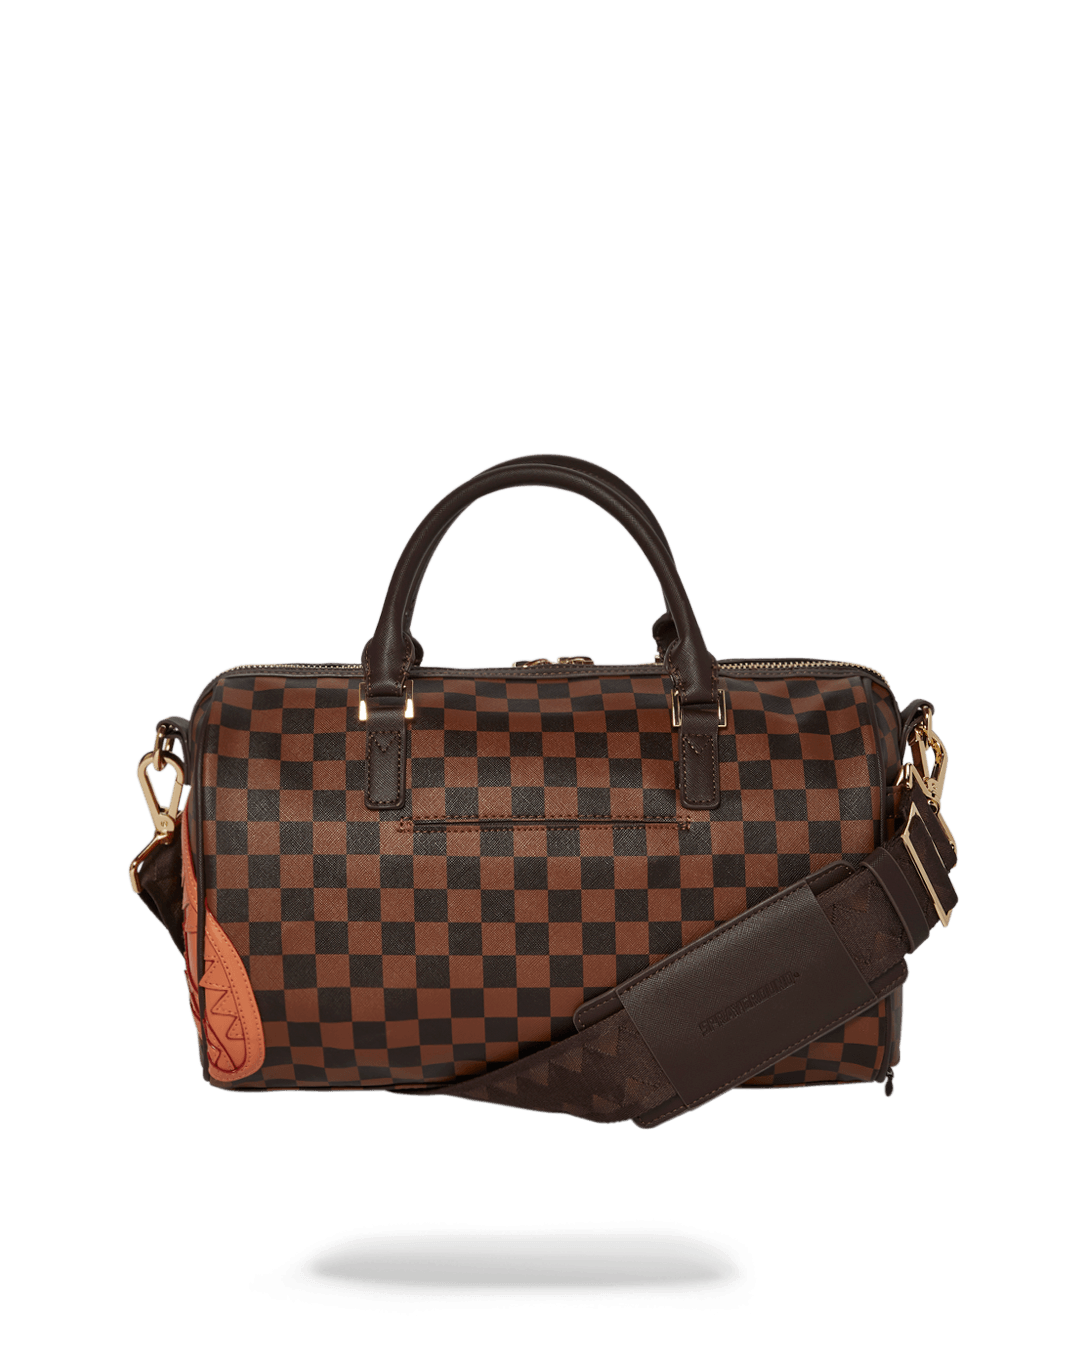 HENNY MINI DUFFLE - HIGH QUALITY AND INEXPENSIVE - HENNY MINI DUFFLE HIGH QUALITY AND INEXPENSIVE-01-4